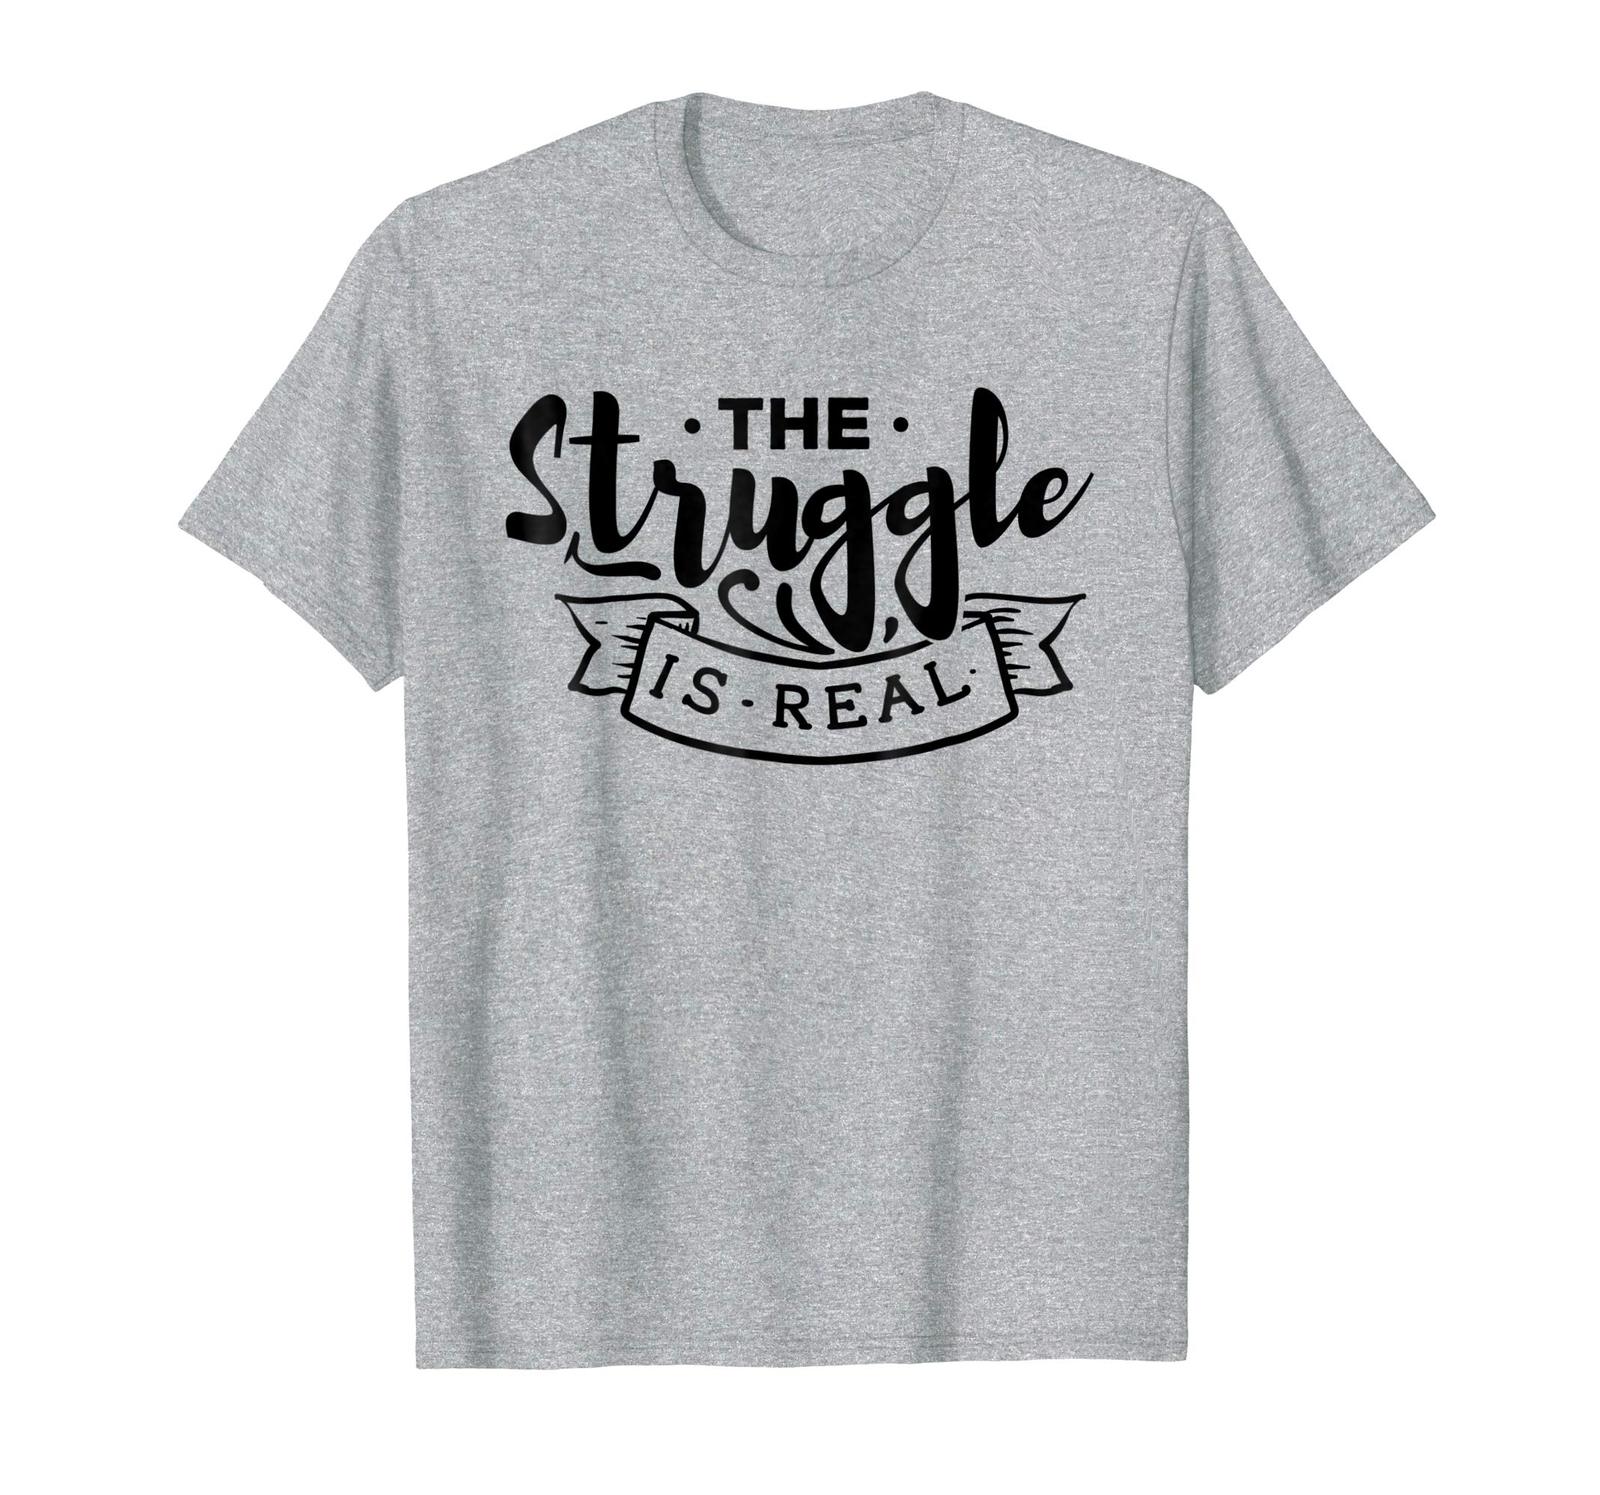 Teacher Style - The Struggle Is Real Funny T-Shirt - Workout Design ...